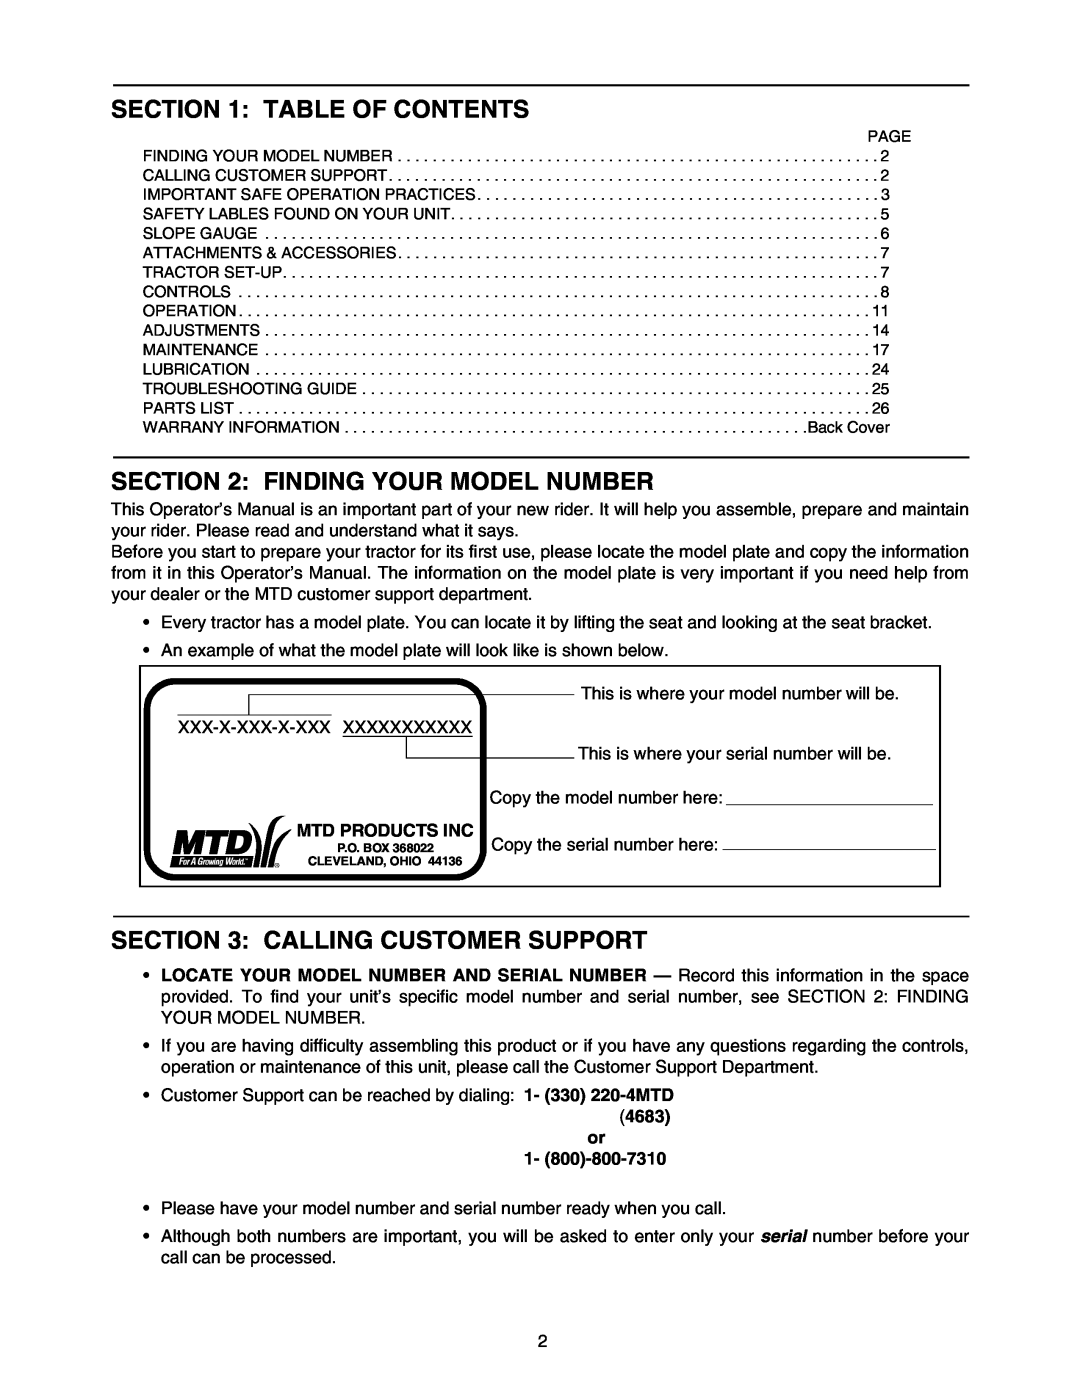 MTD 604 manual Table Of Contents, Finding Your Model Number, Calling Customer Support, Mtd Products Inc, 4683 or 